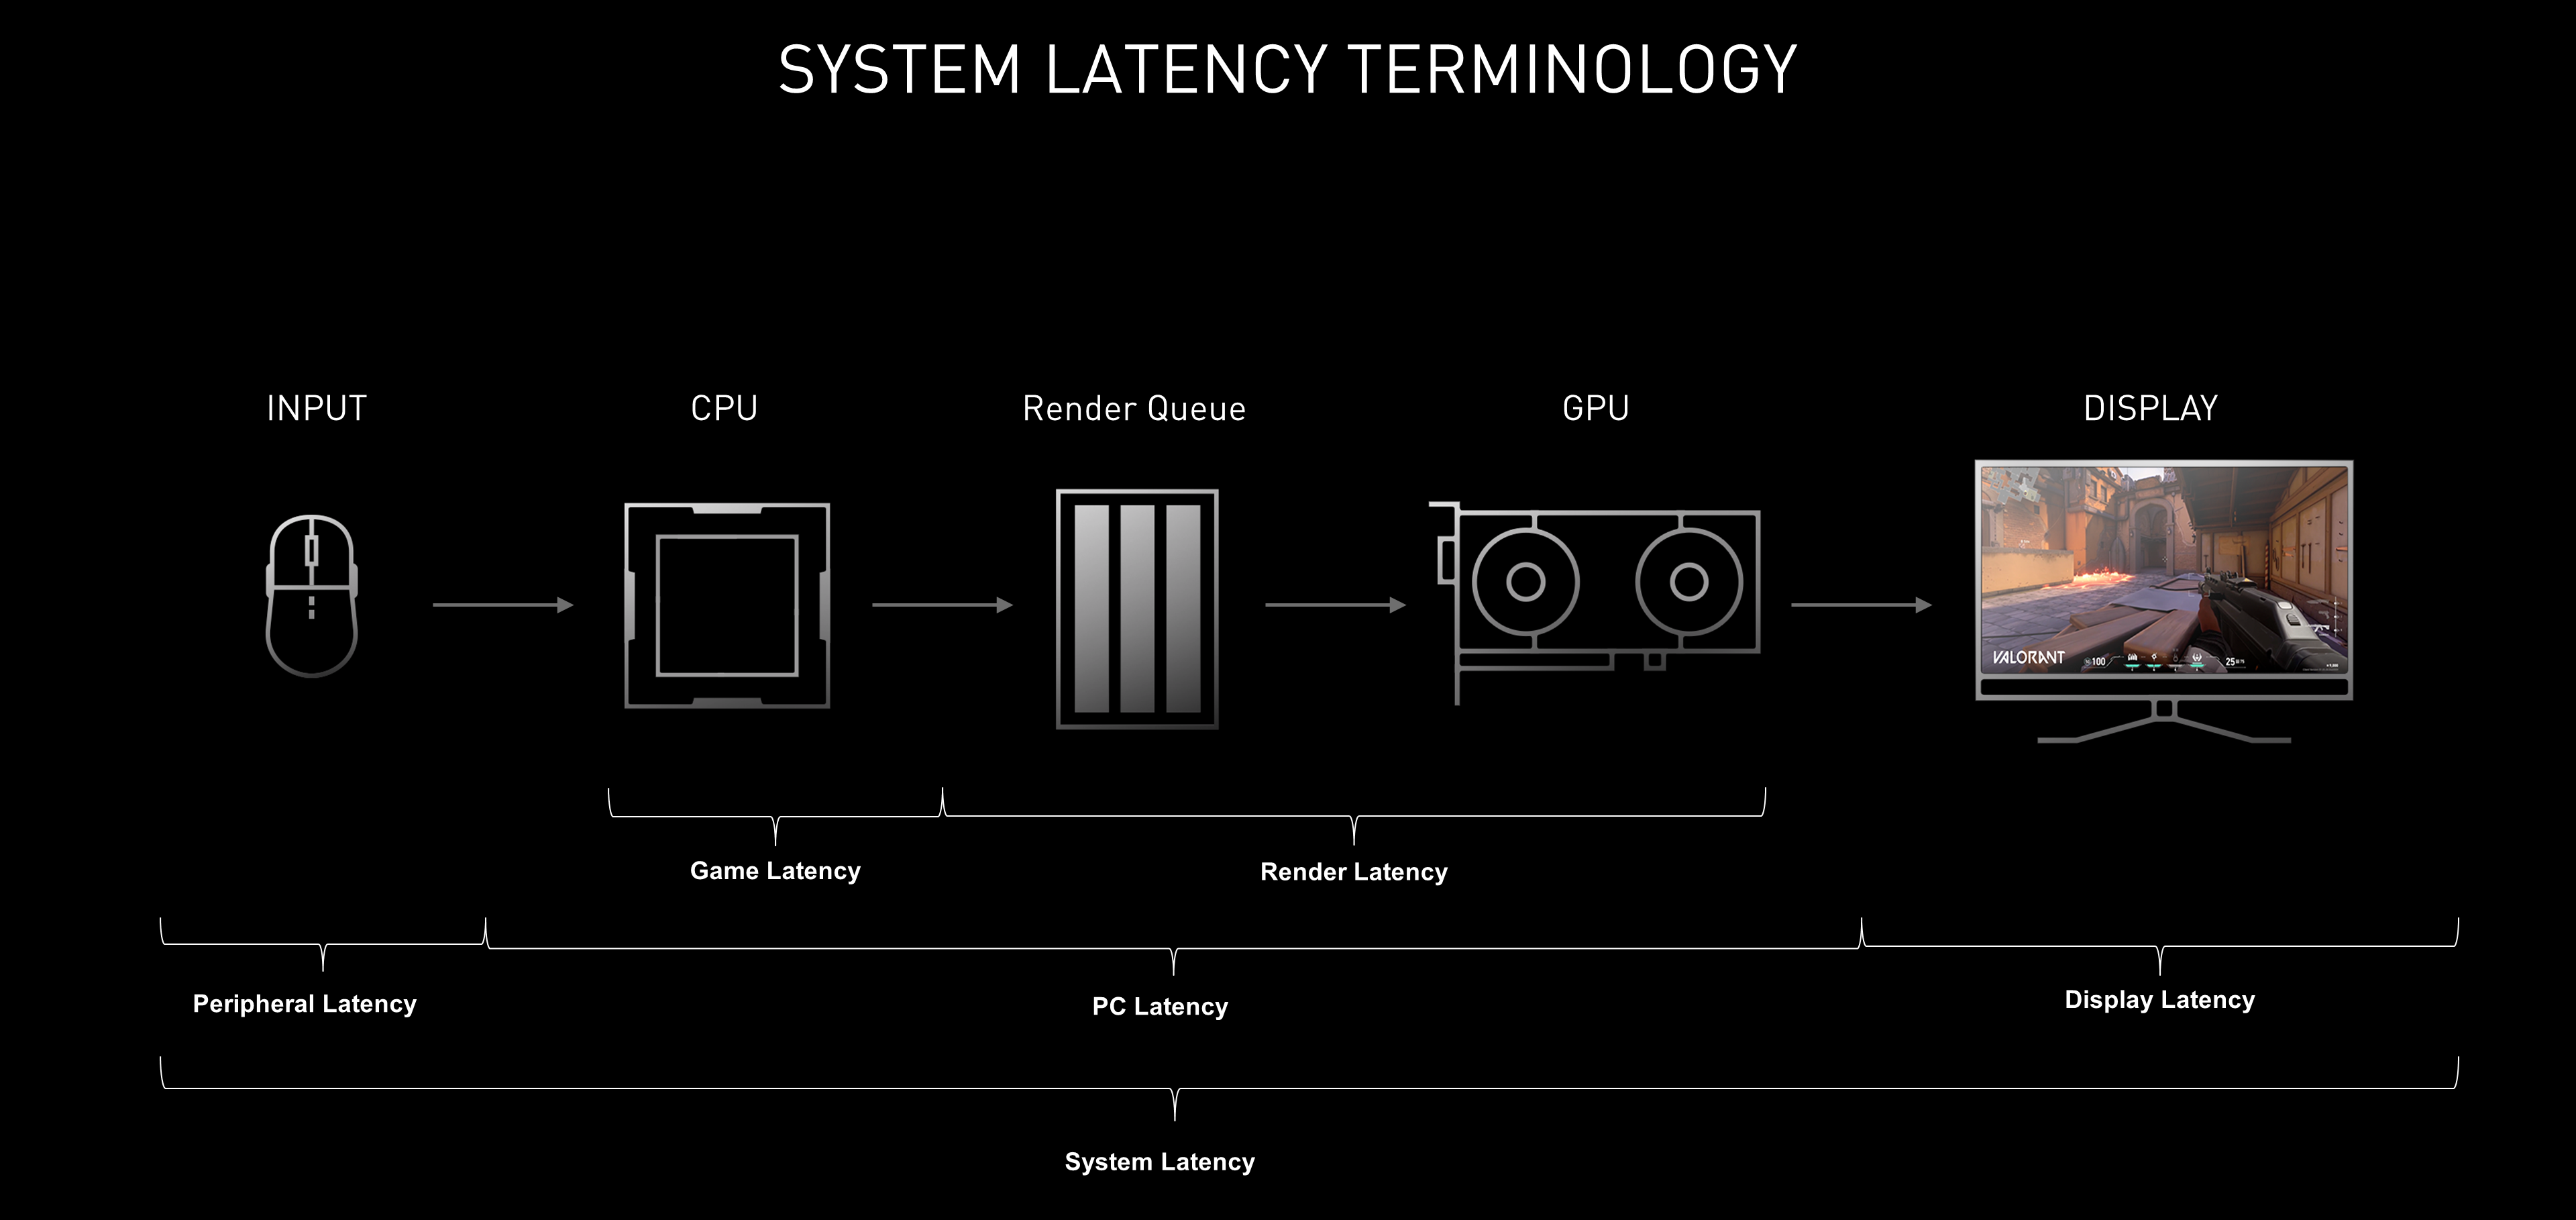 Introducing NVIDIA Reflex: Optimize and Measure Latency in